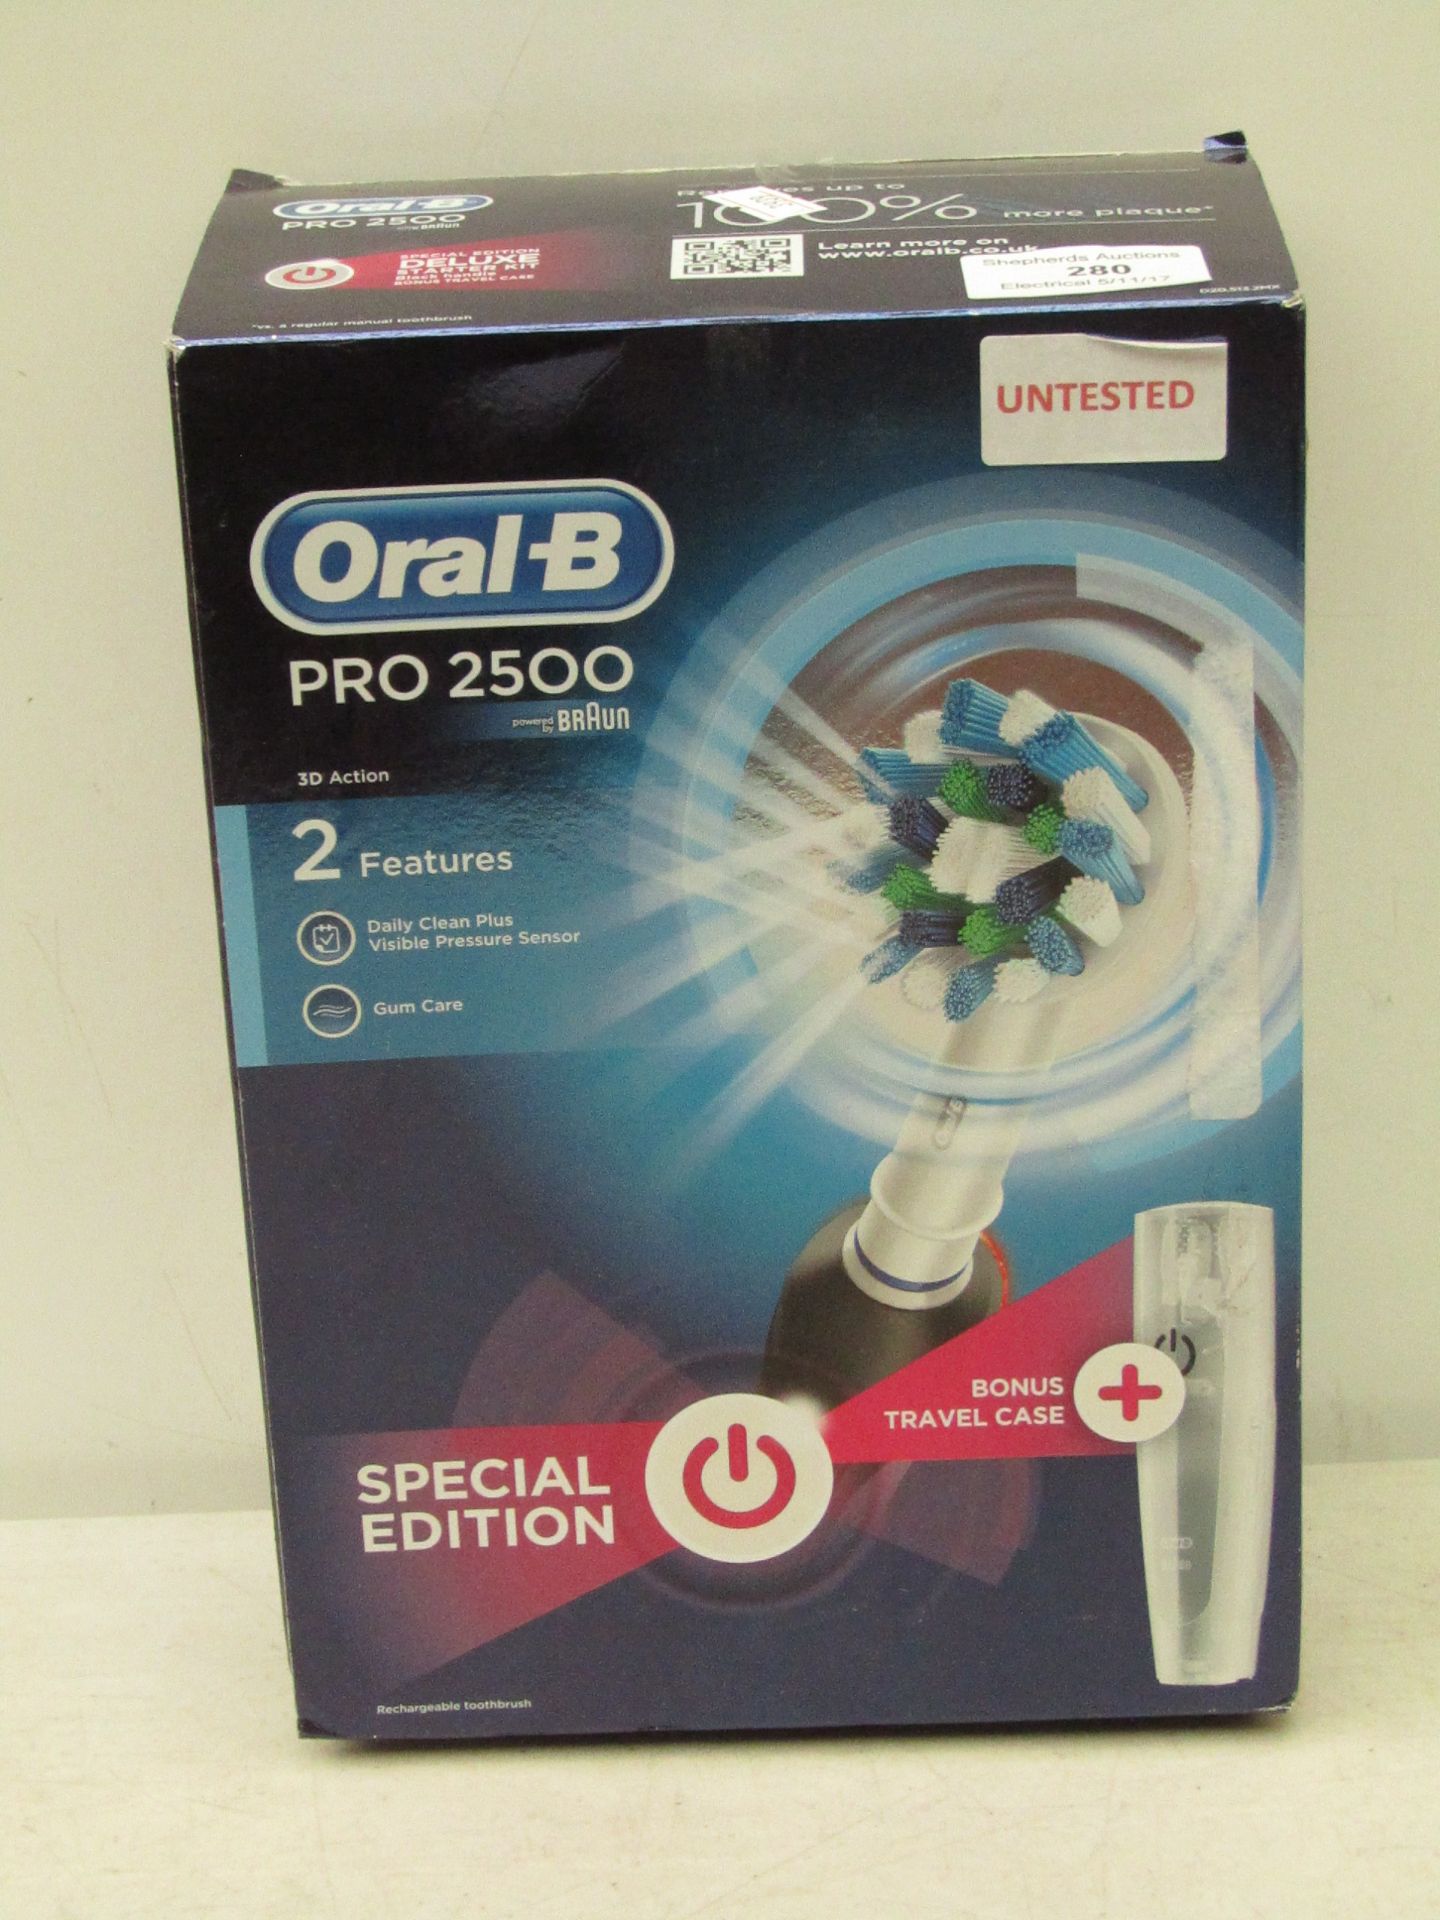 Oral-B Pro 2500 special edition rechargeable toothbrush, untested and boxed.